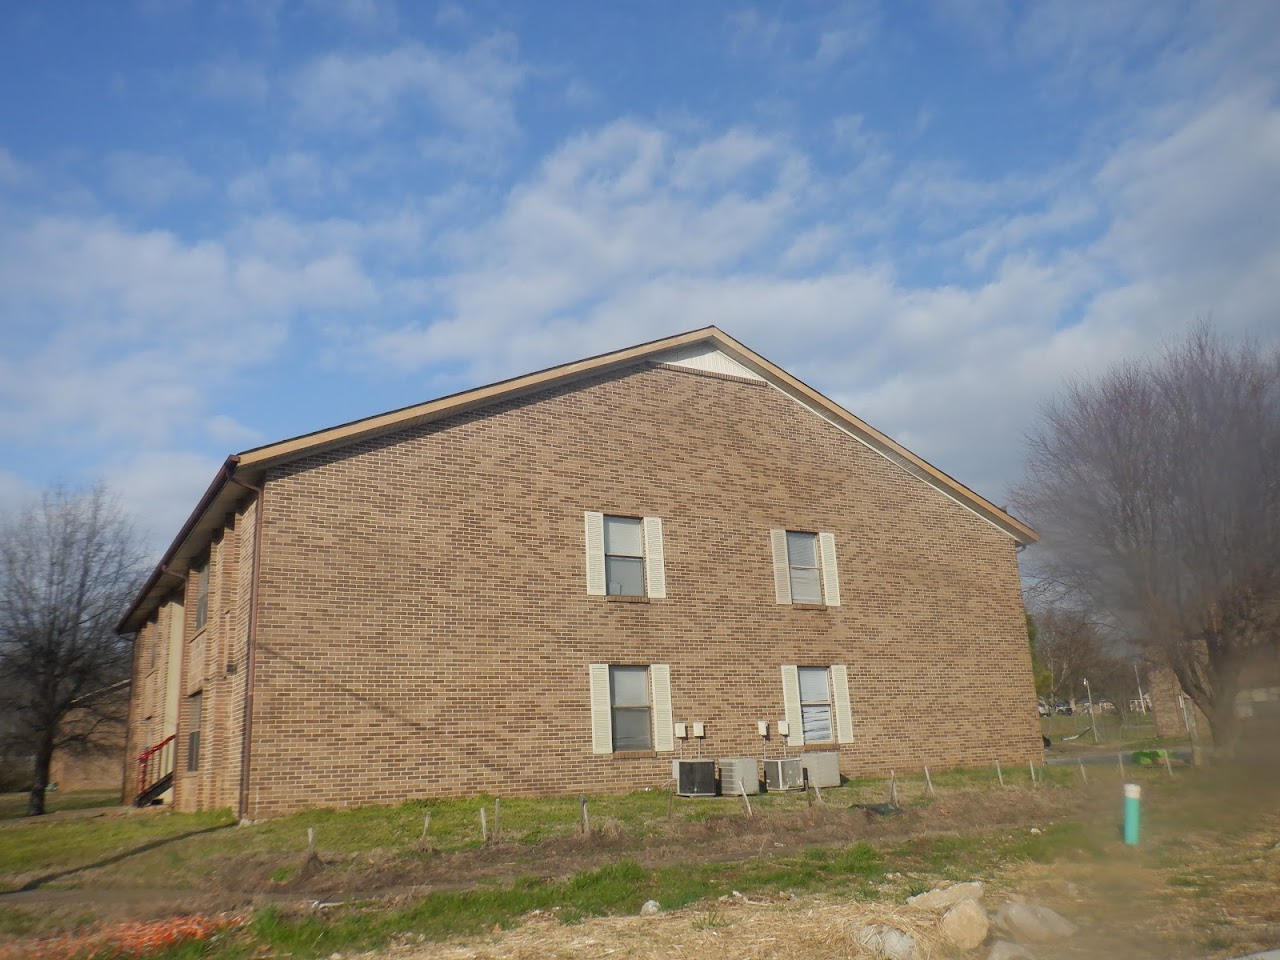 Photo of SPRING HILL VILLAGE. Affordable housing located at 2593 DUPLEX RD. SPRING HILL, TN 37174